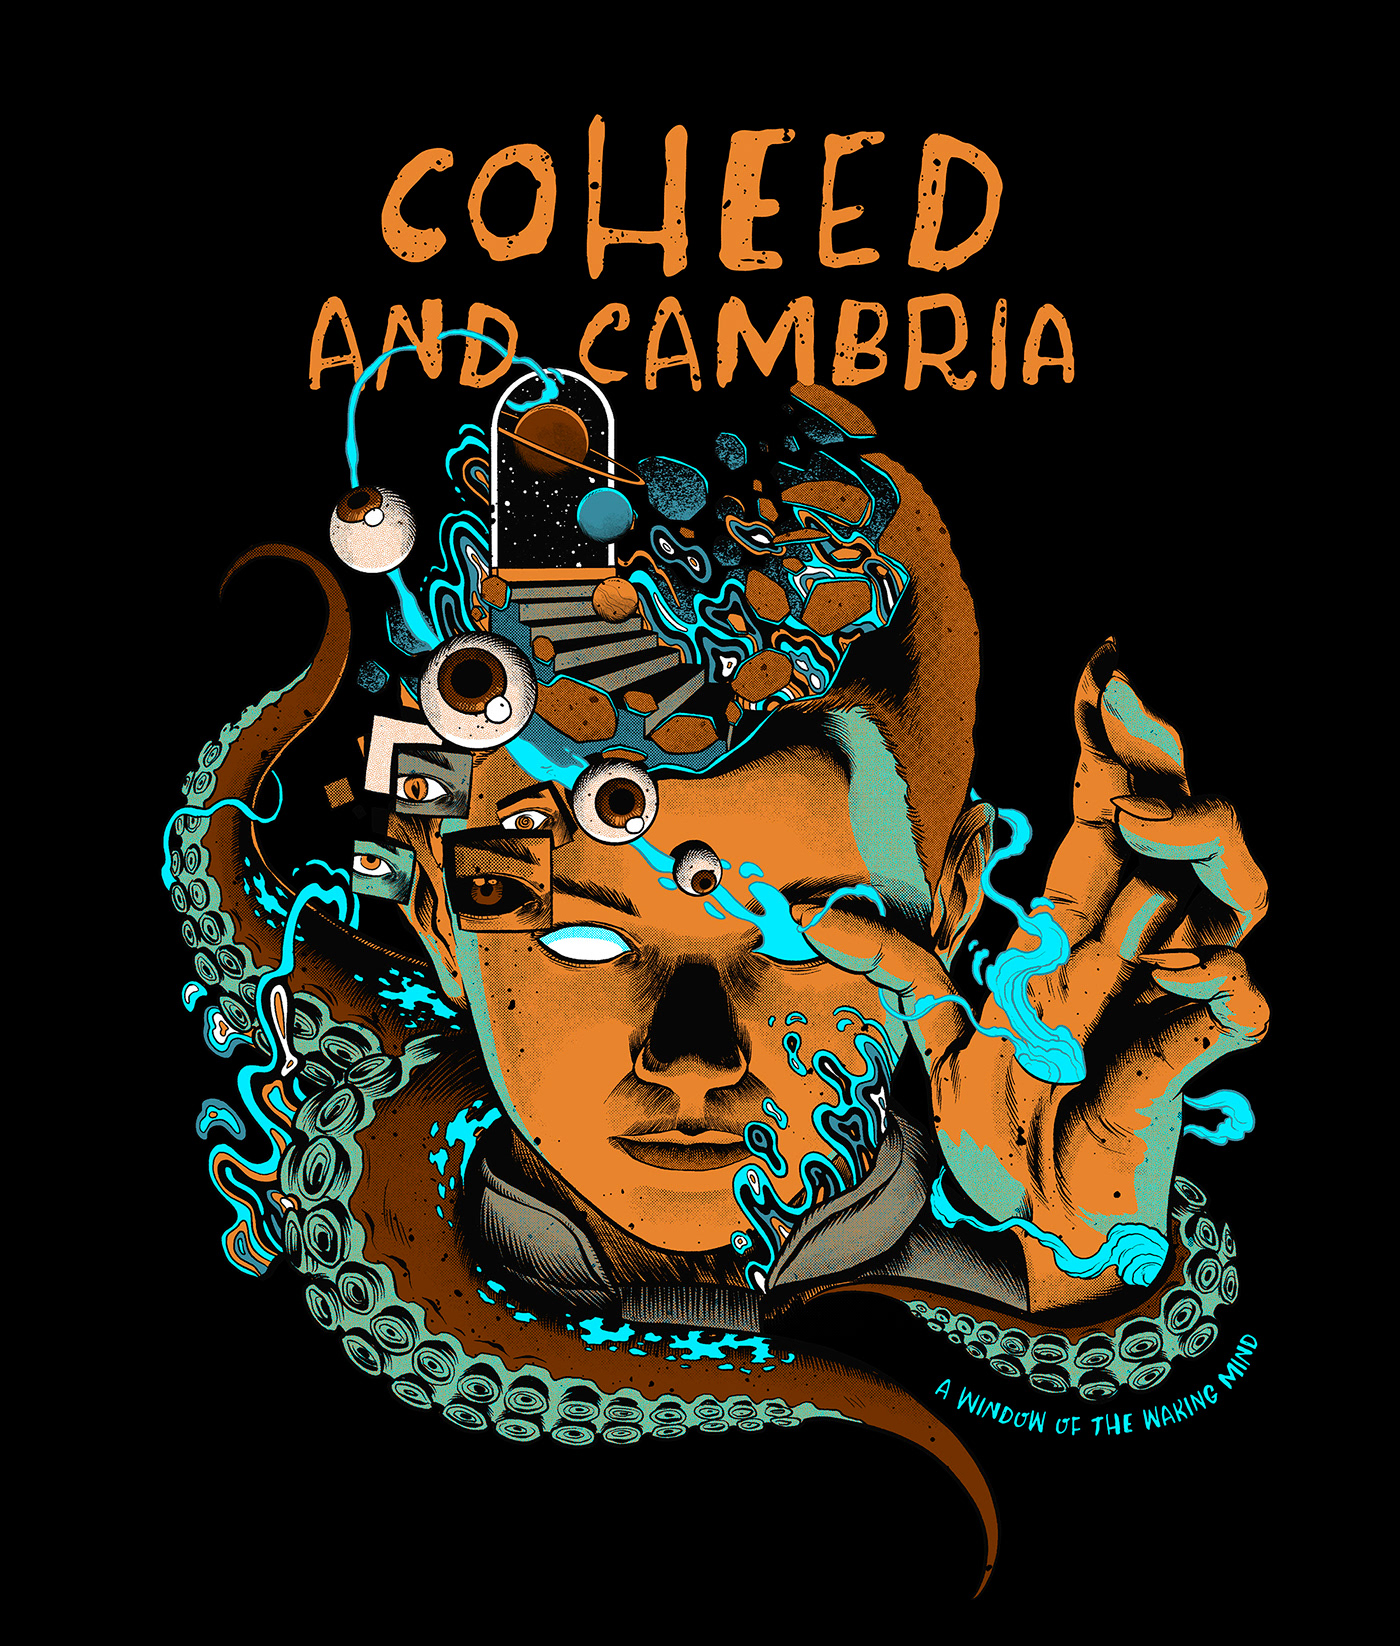 Coheed And Cambria eclipse hollywood music portal poster robot sci-fi Scifi Space 